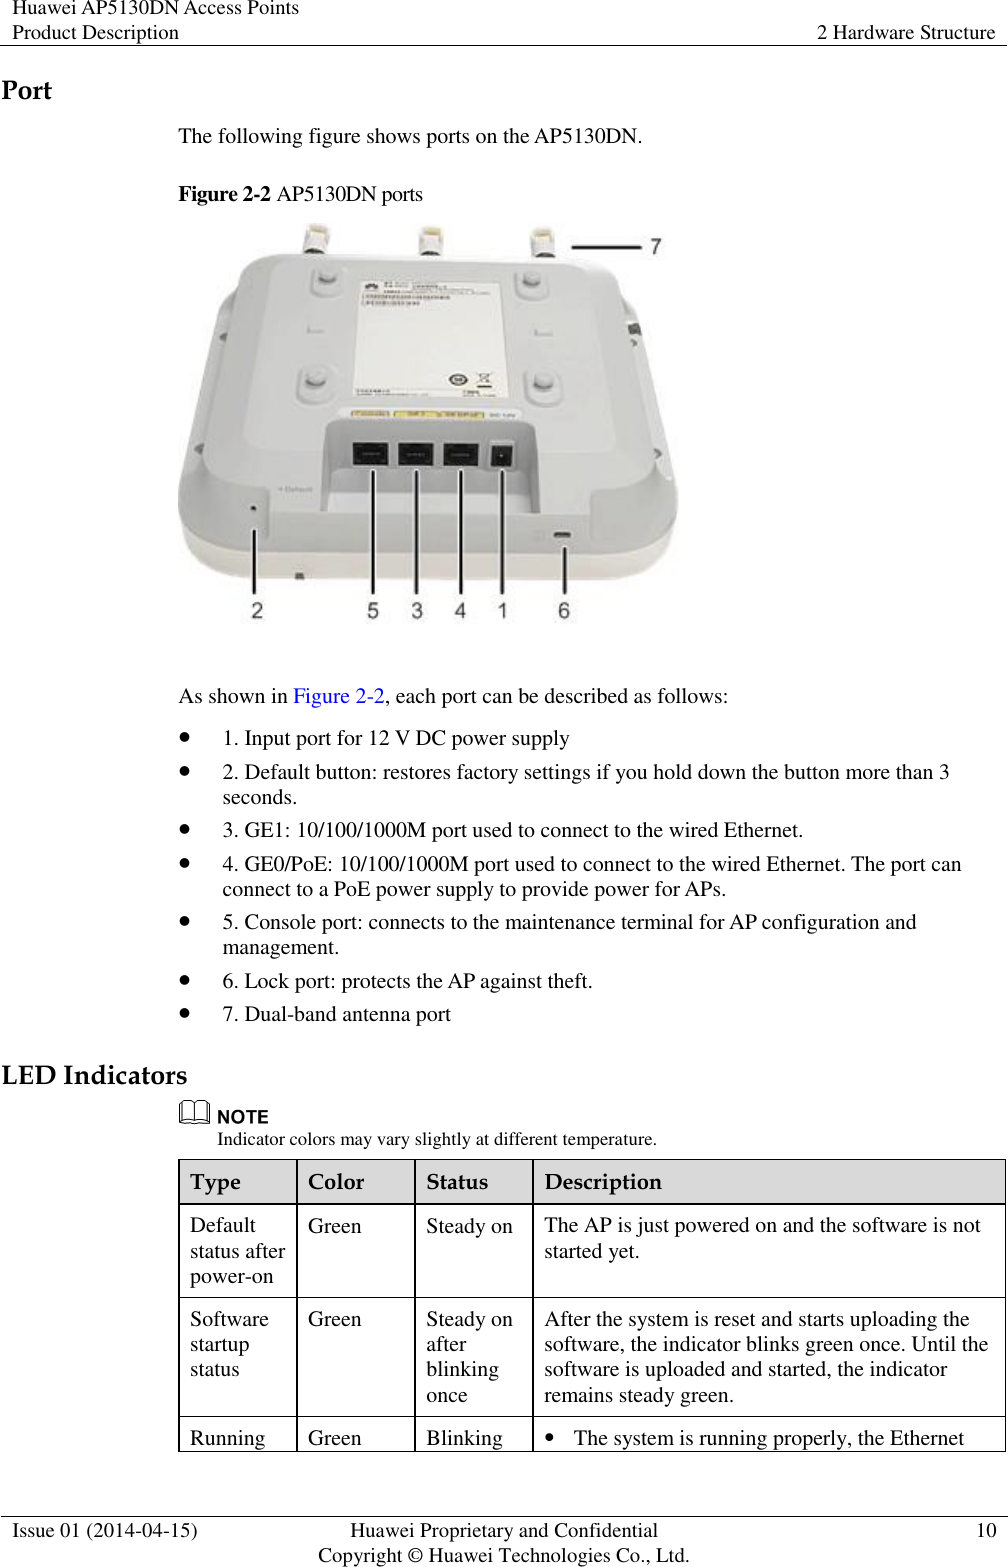 Huawei AP5130DN Access Points Product Description 2 Hardware Structure  Issue 01 (2014-04-15) Huawei Proprietary and Confidential                                     Copyright © Huawei Technologies Co., Ltd. 10  Port The following figure shows ports on the AP5130DN. Figure 2-2 AP5130DN ports   As shown in Figure 2-2, each port can be described as follows:  1. Input port for 12 V DC power supply  2. Default button: restores factory settings if you hold down the button more than 3 seconds.  3. GE1: 10/100/1000M port used to connect to the wired Ethernet.  4. GE0/PoE: 10/100/1000M port used to connect to the wired Ethernet. The port can connect to a PoE power supply to provide power for APs.  5. Console port: connects to the maintenance terminal for AP configuration and management.  6. Lock port: protects the AP against theft.  7. Dual-band antenna port LED Indicators  Indicator colors may vary slightly at different temperature. Type Color Status Description Default status after power-on Green Steady on The AP is just powered on and the software is not started yet. Software startup status Green Steady on after blinking once After the system is reset and starts uploading the software, the indicator blinks green once. Until the software is uploaded and started, the indicator remains steady green. Running Green Blinking  The system is running properly, the Ethernet 